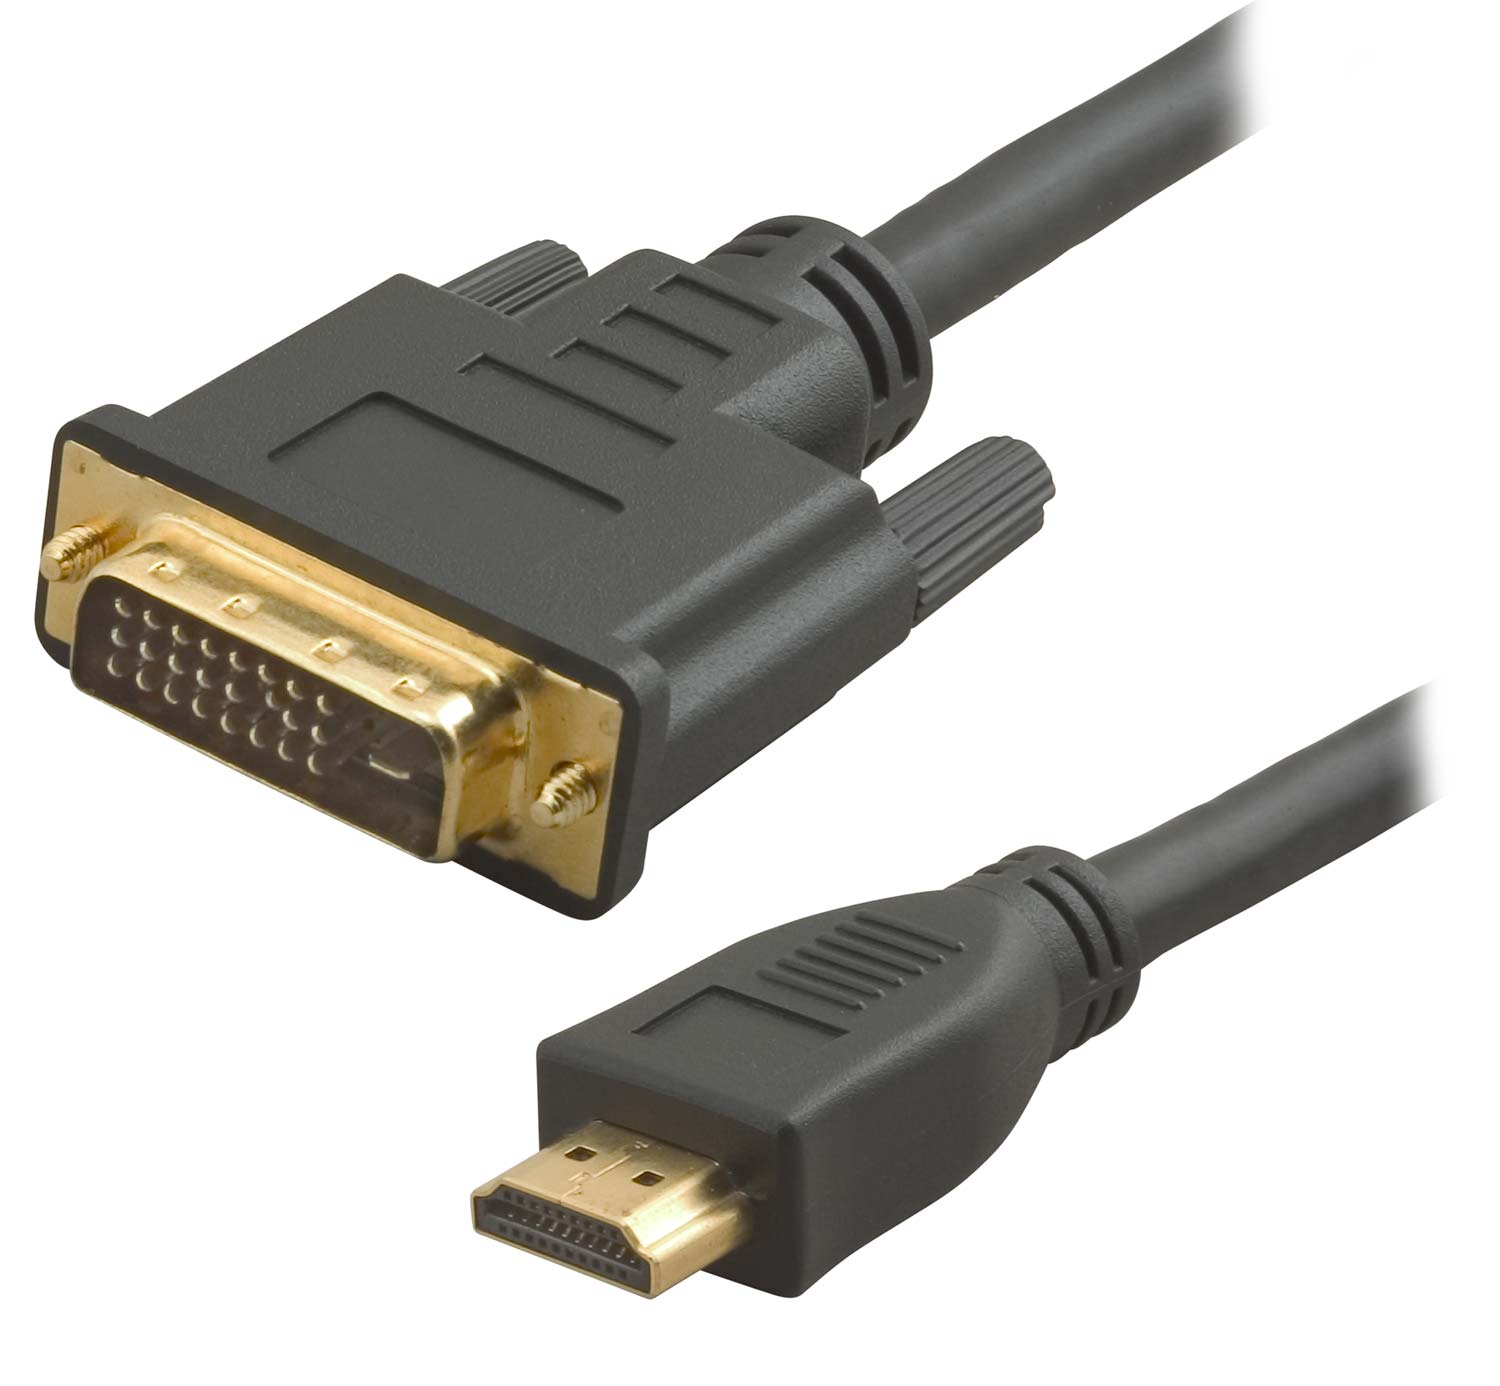 HF-CAB-HDMI-DVI: 6 to 50ft heavy duty DVI(24+1 pin) to HDMI Cable